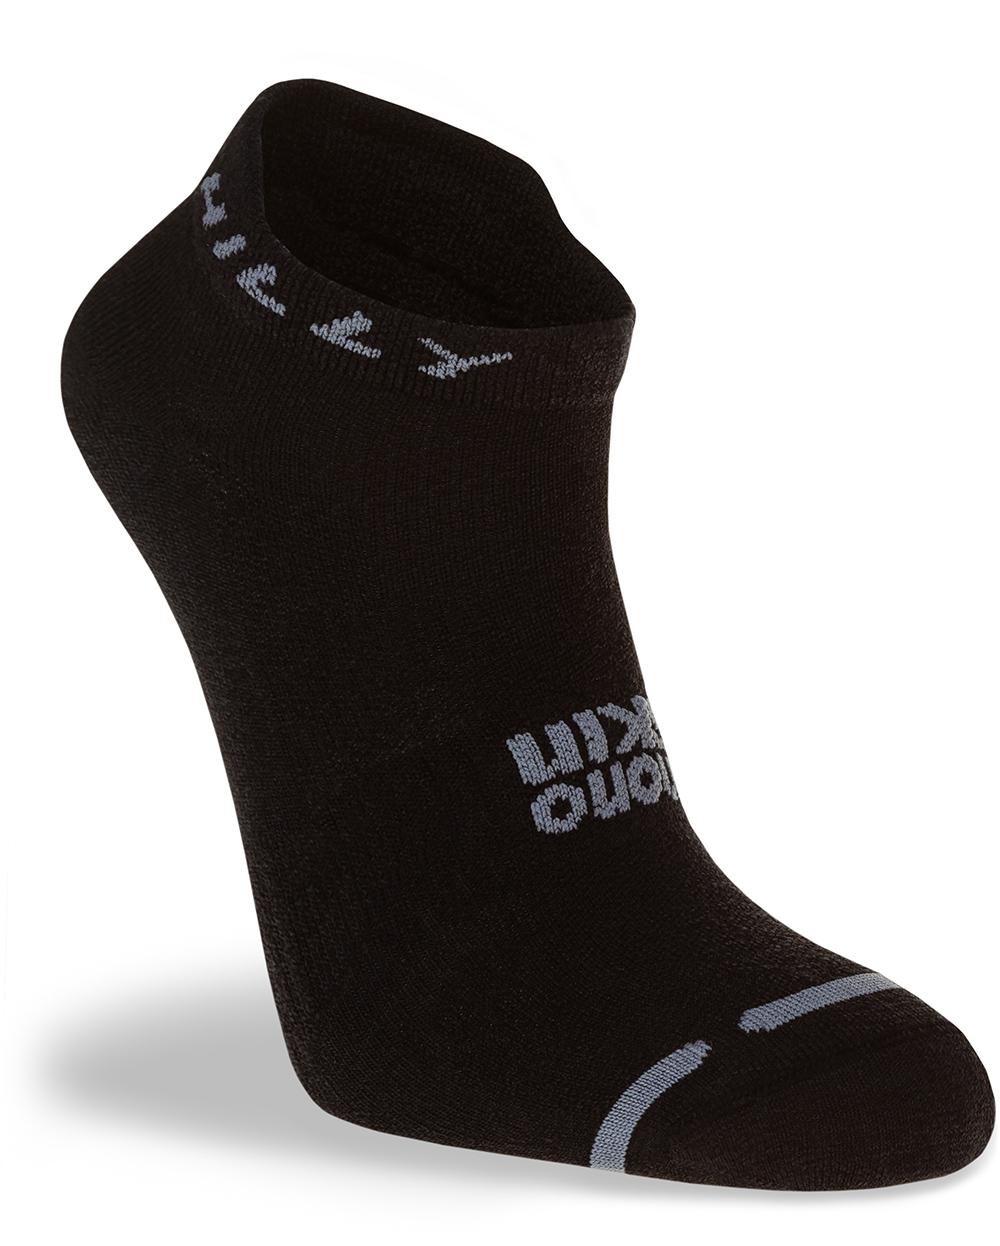 Image of Chaussettes Hilly Lite (basses) - Black/Grey